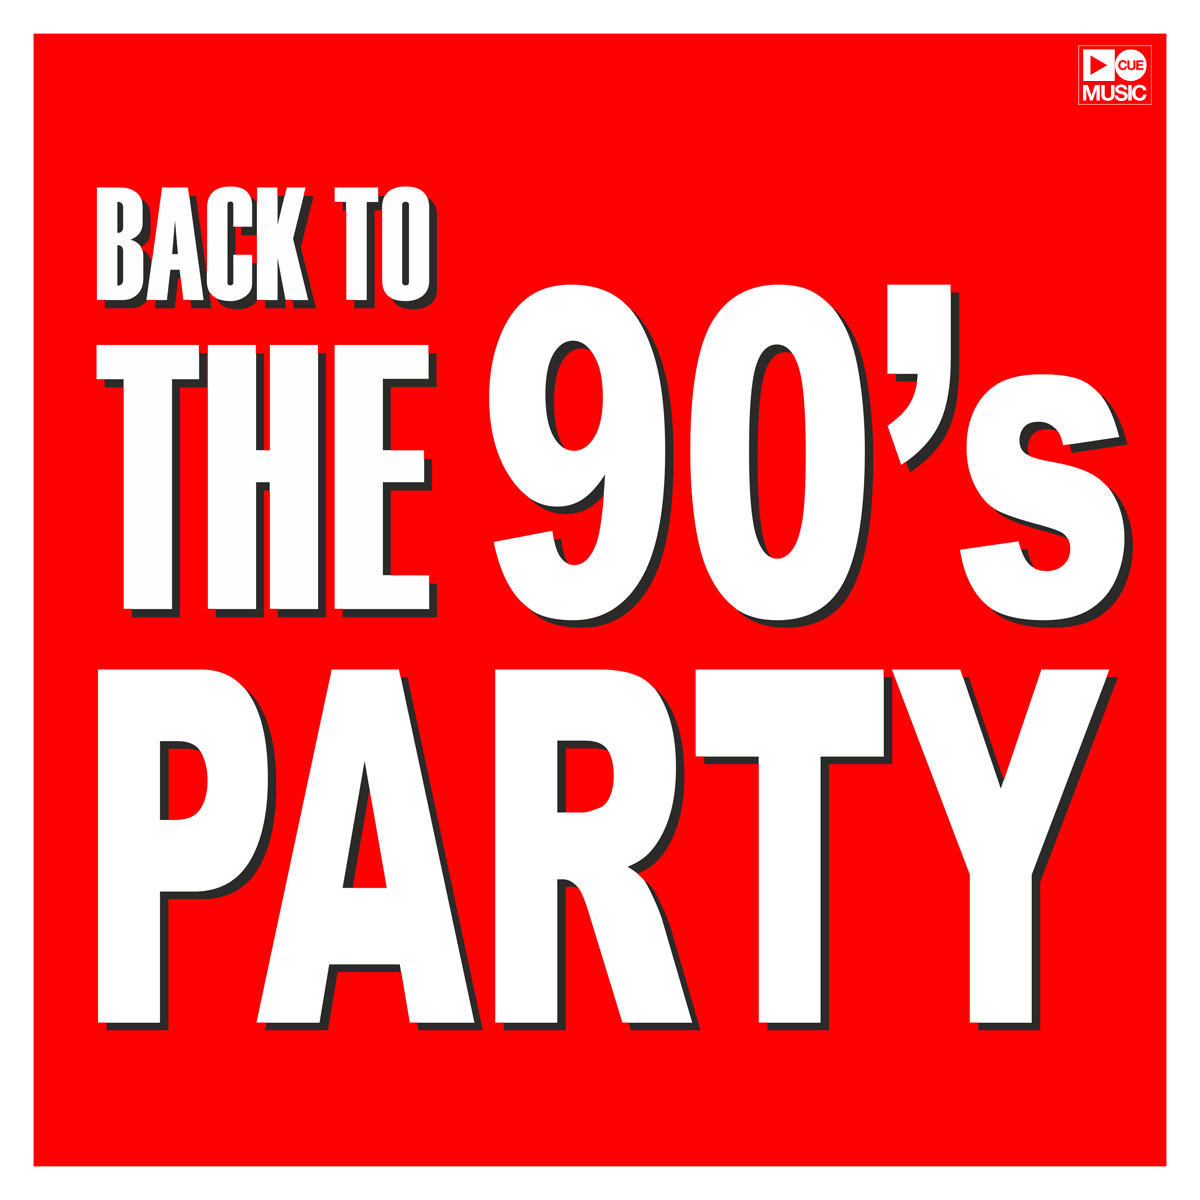 BACK TO THE 90'S PARTY